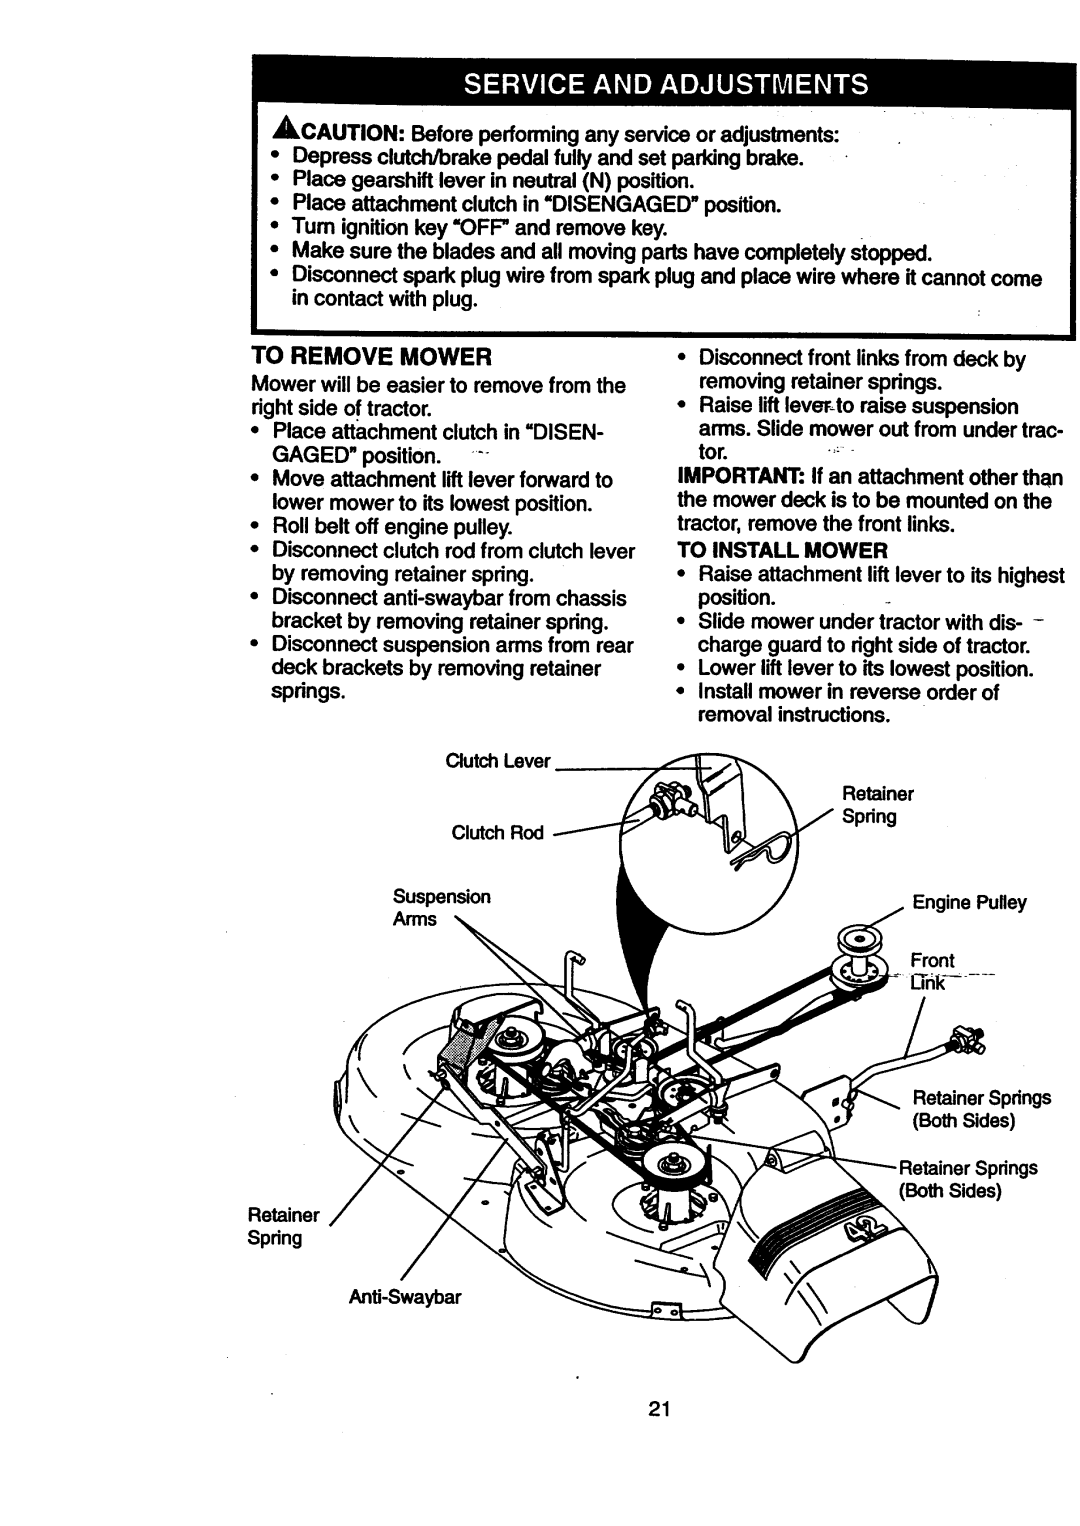 Craftsman 917.270512 owner manual Tum ignition key OFF and remove key 